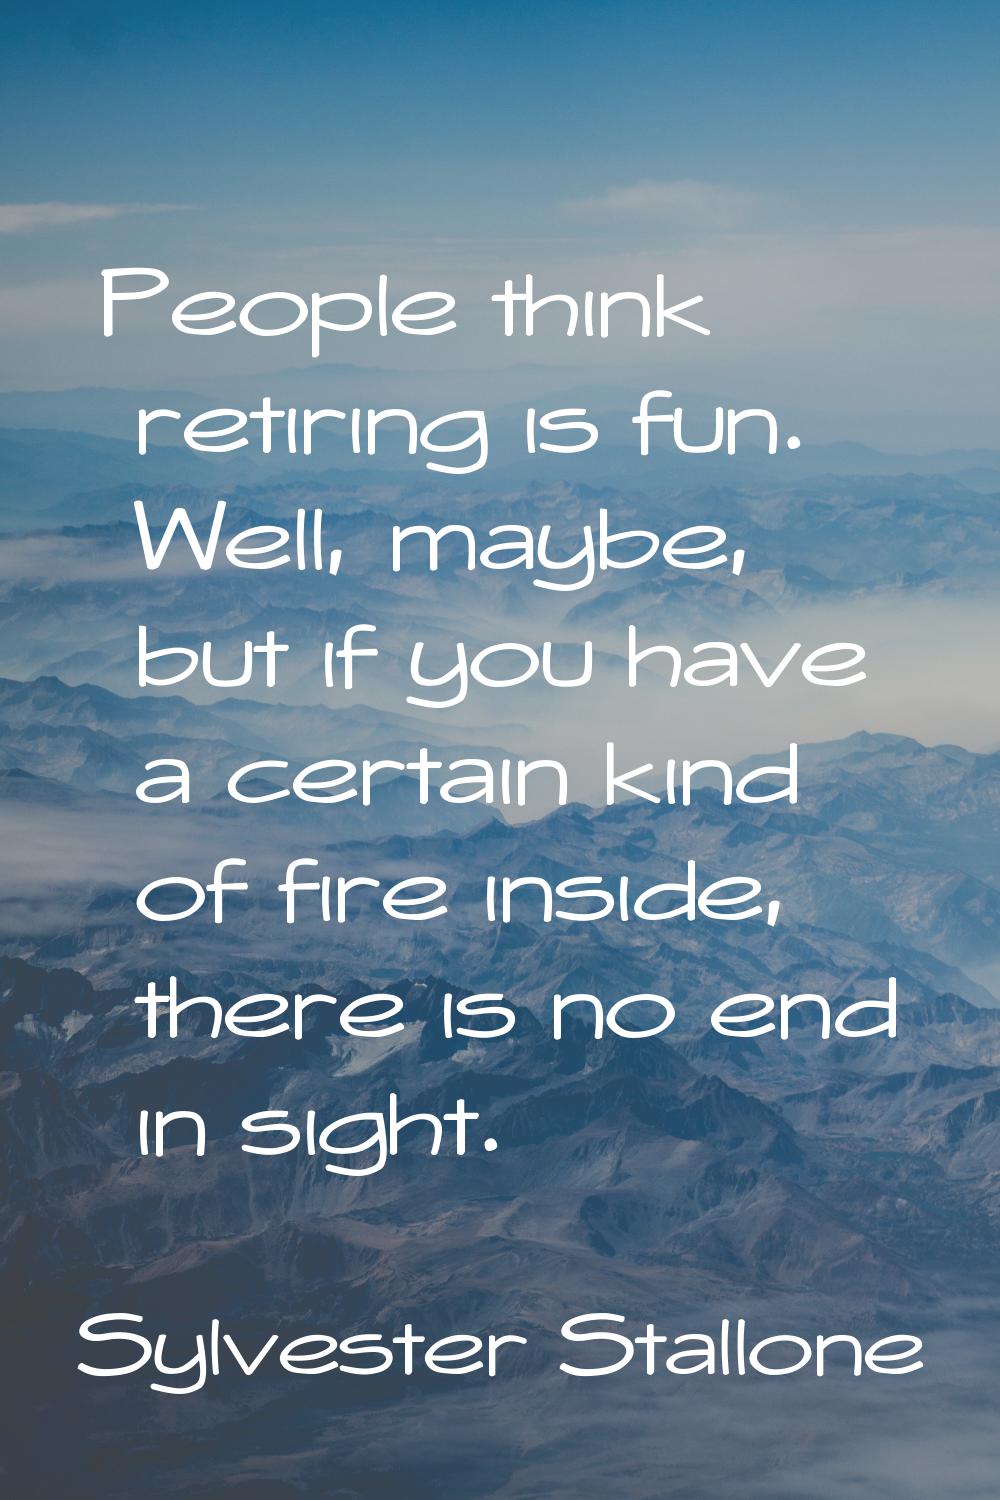 People think retiring is fun. Well, maybe, but if you have a certain kind of fire inside, there is 